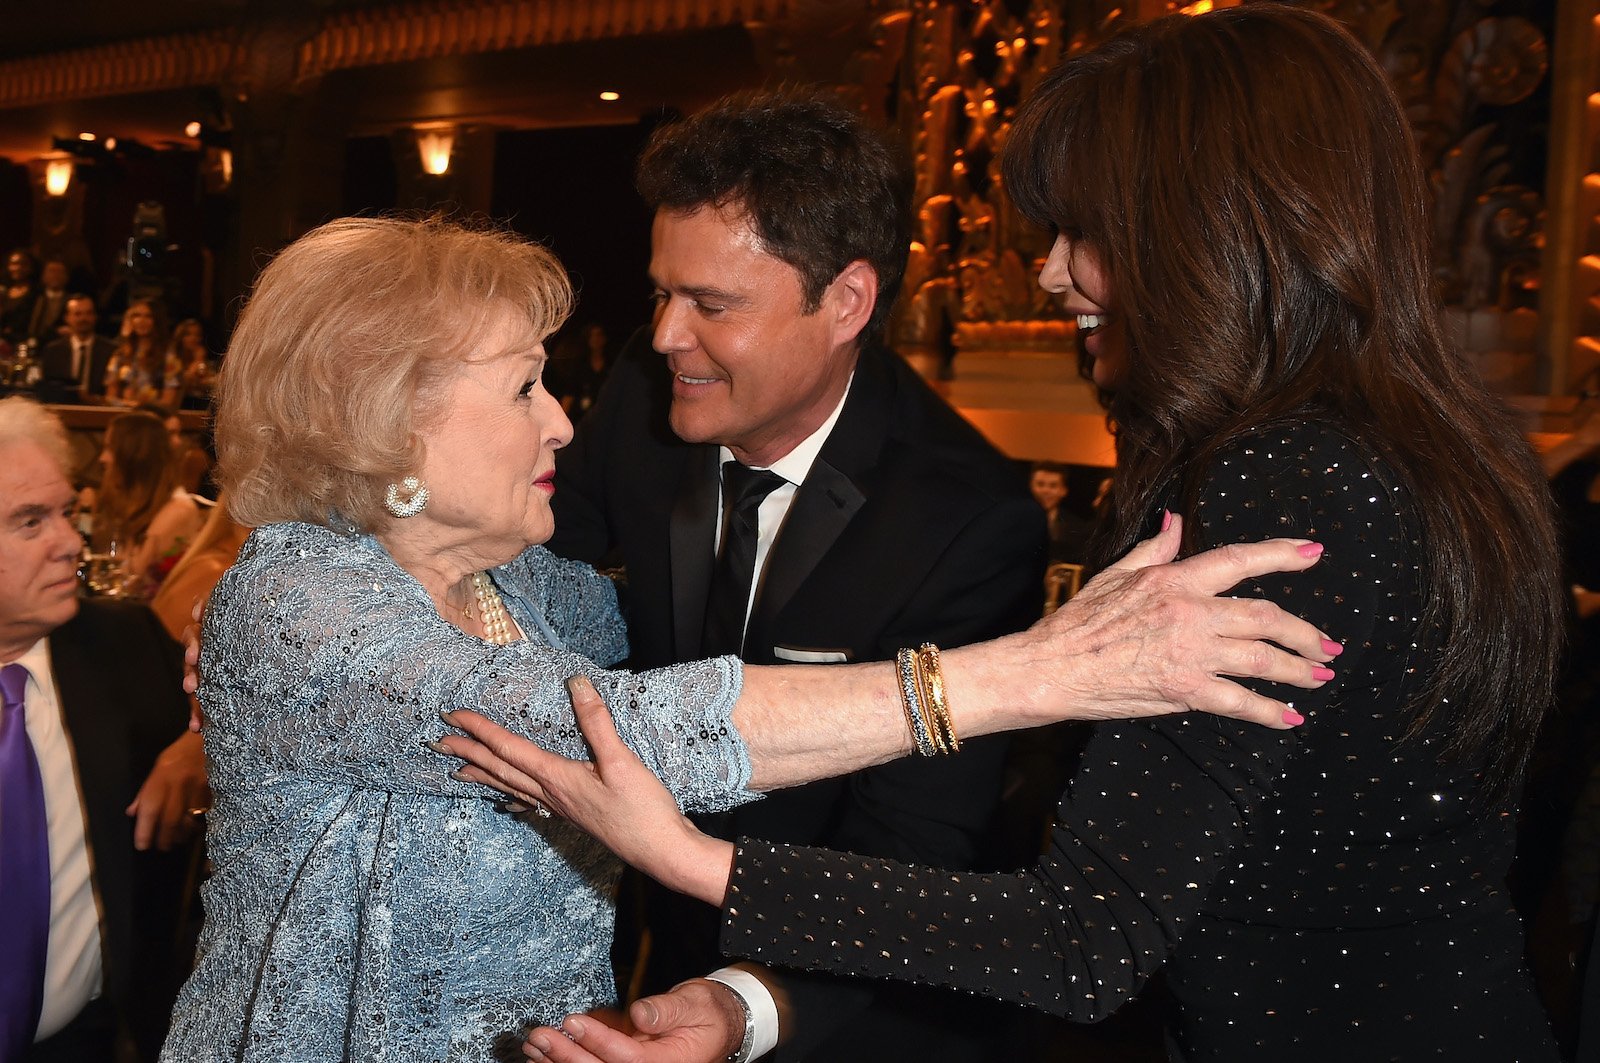 Betty White, Donny Osmond and Marie Osmond attend the 2015 TV Land Awards at Saban Theatre